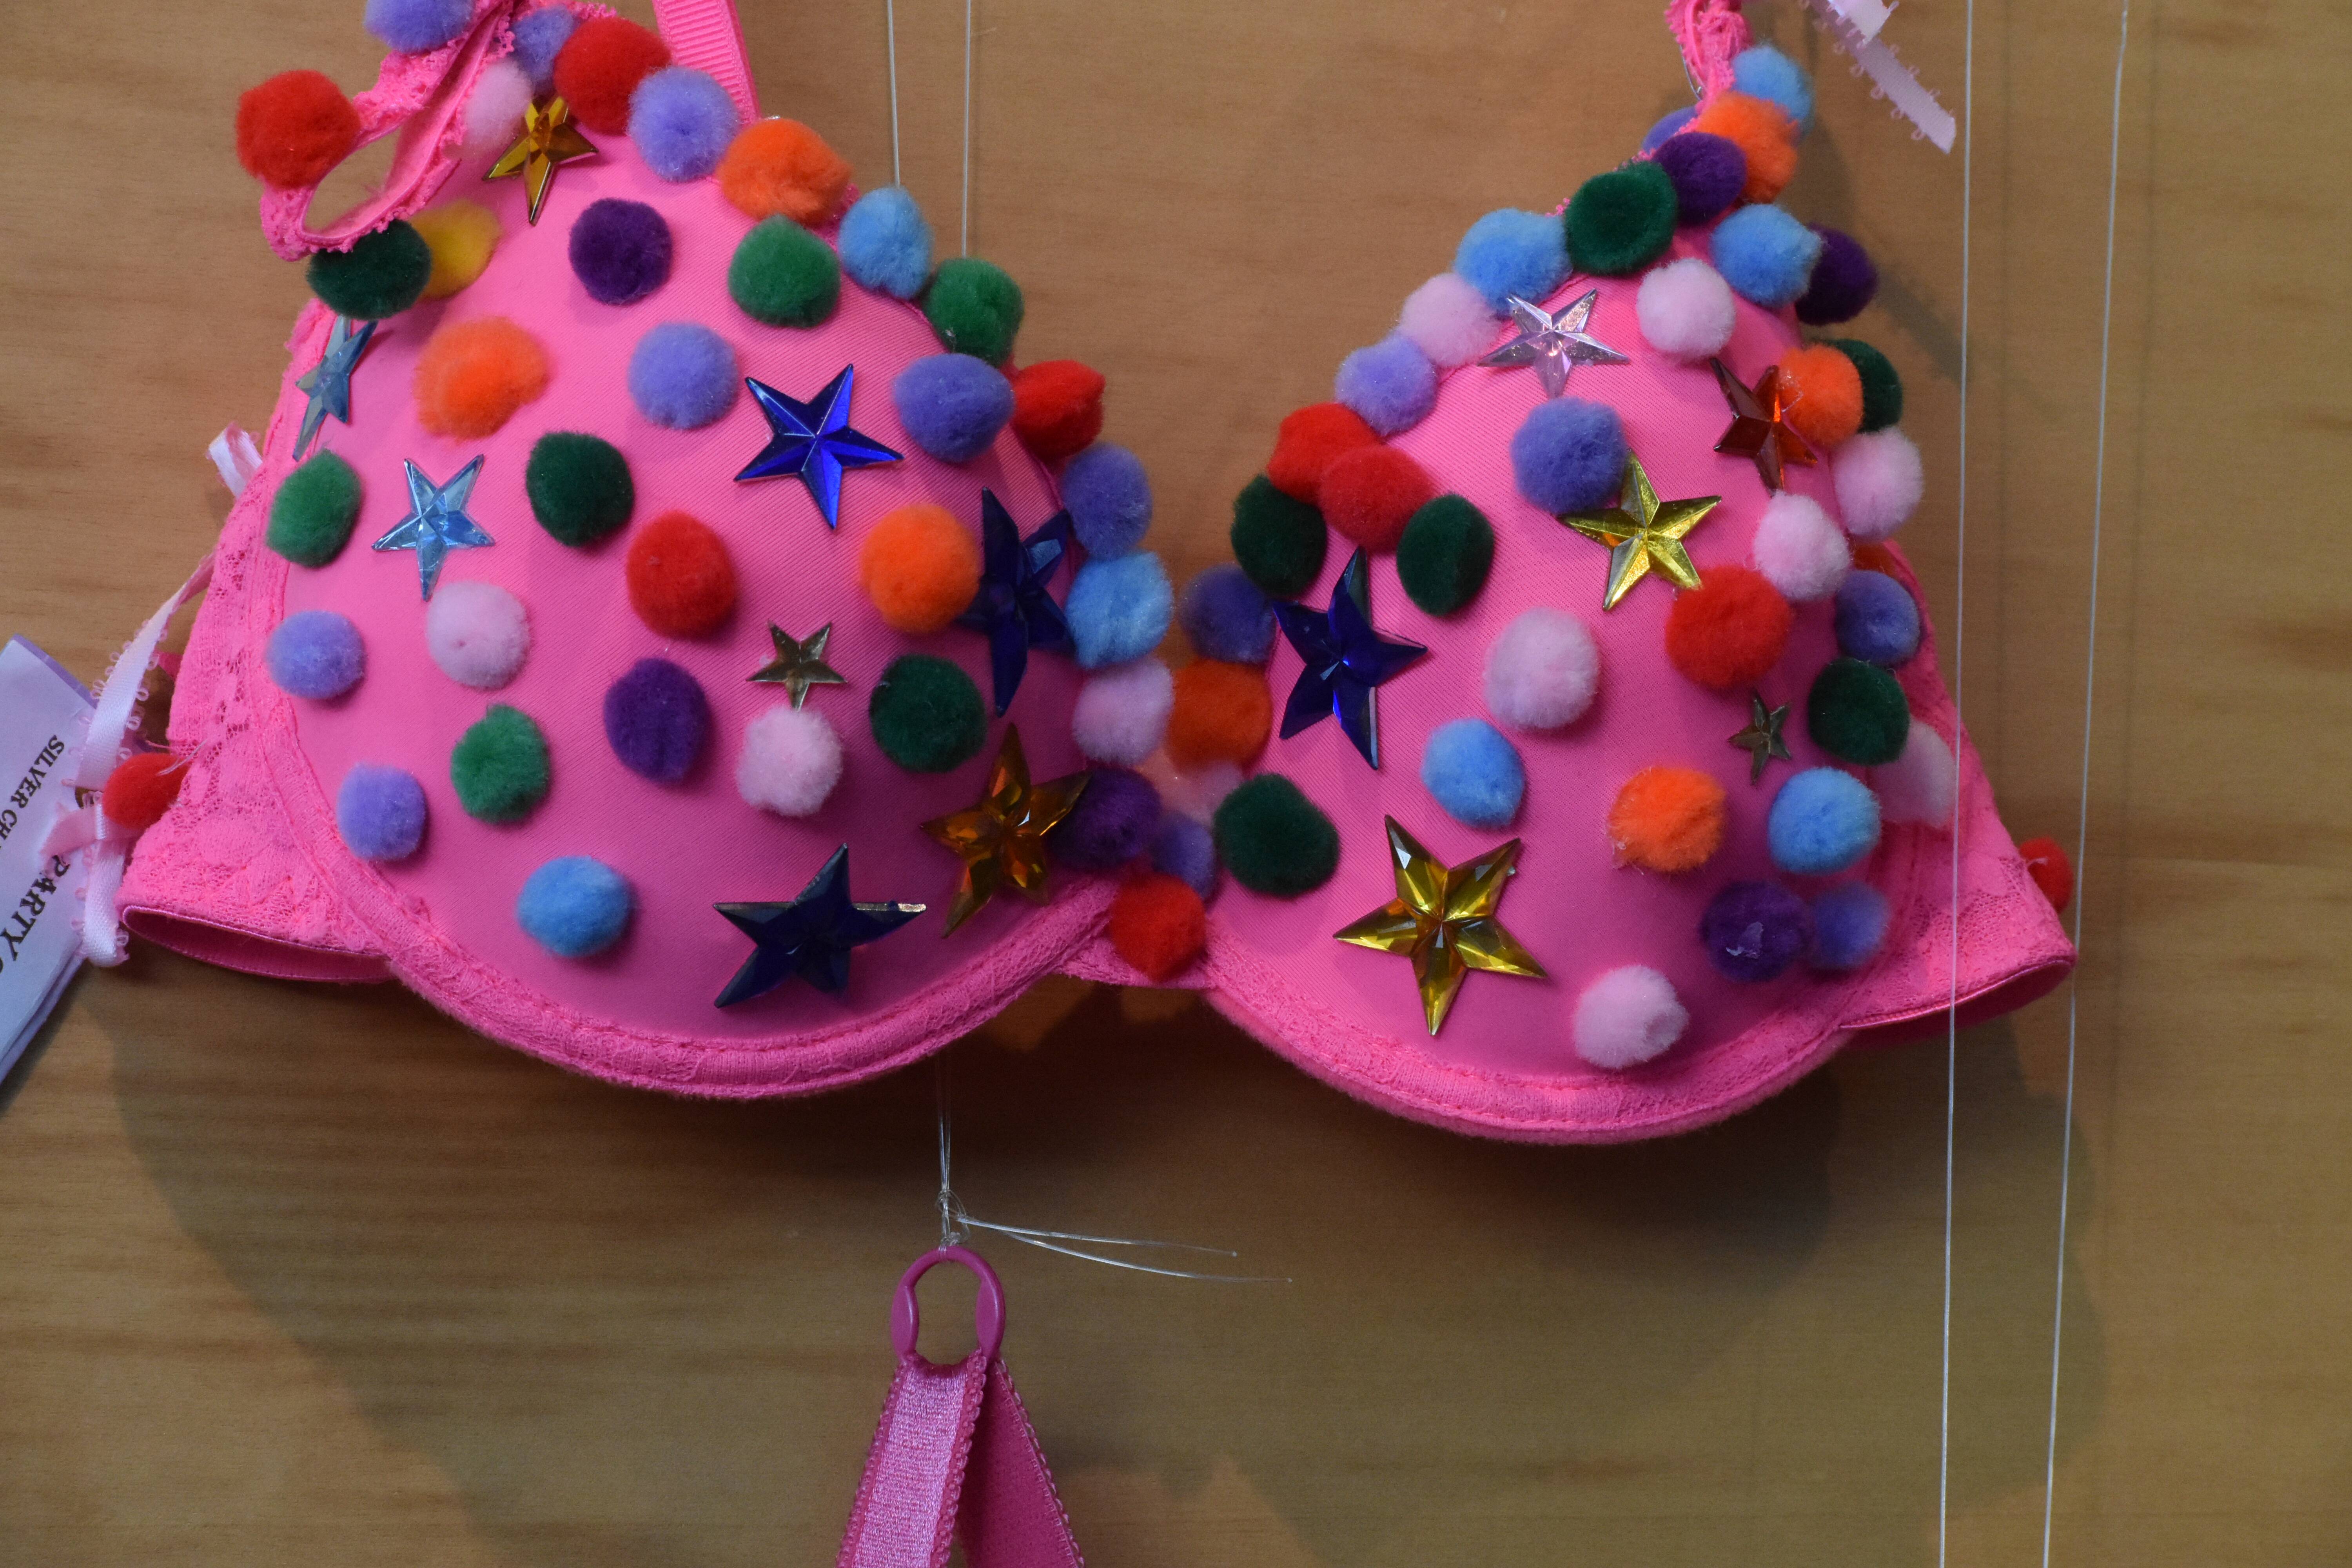 Pair of decorated bra morning teas to raise funds for Cancer